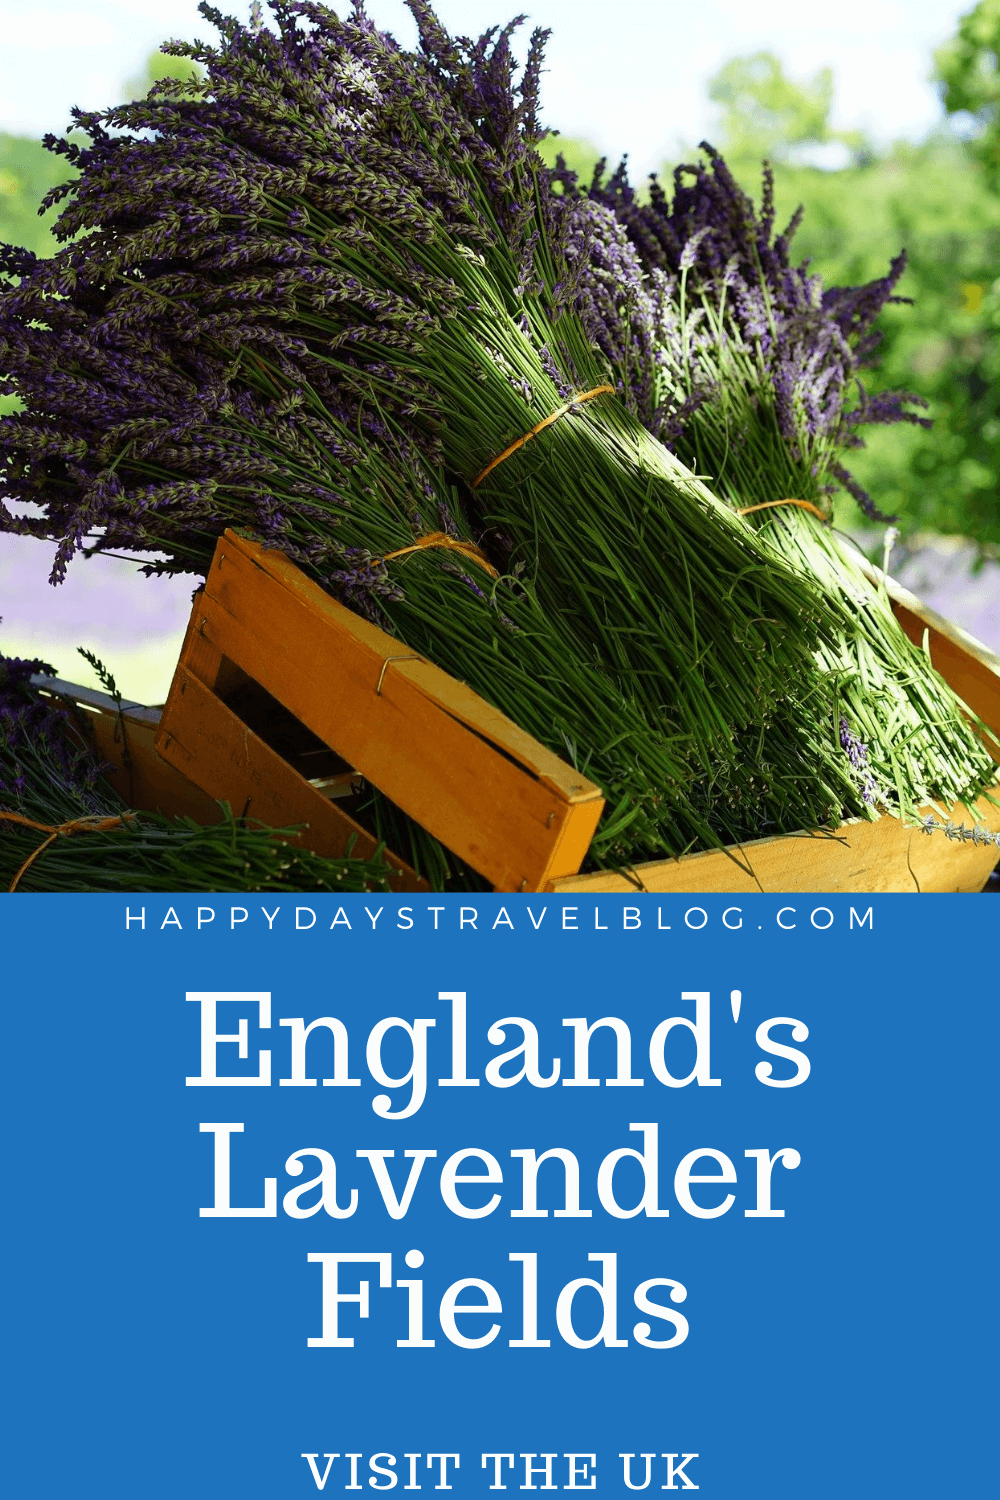 Everything you need to know about visiting England's lavender fields - the best ones to go to, when to visit, opening times, prices, attractions. #lavender #visituk #lavenderfields #england #visitengland